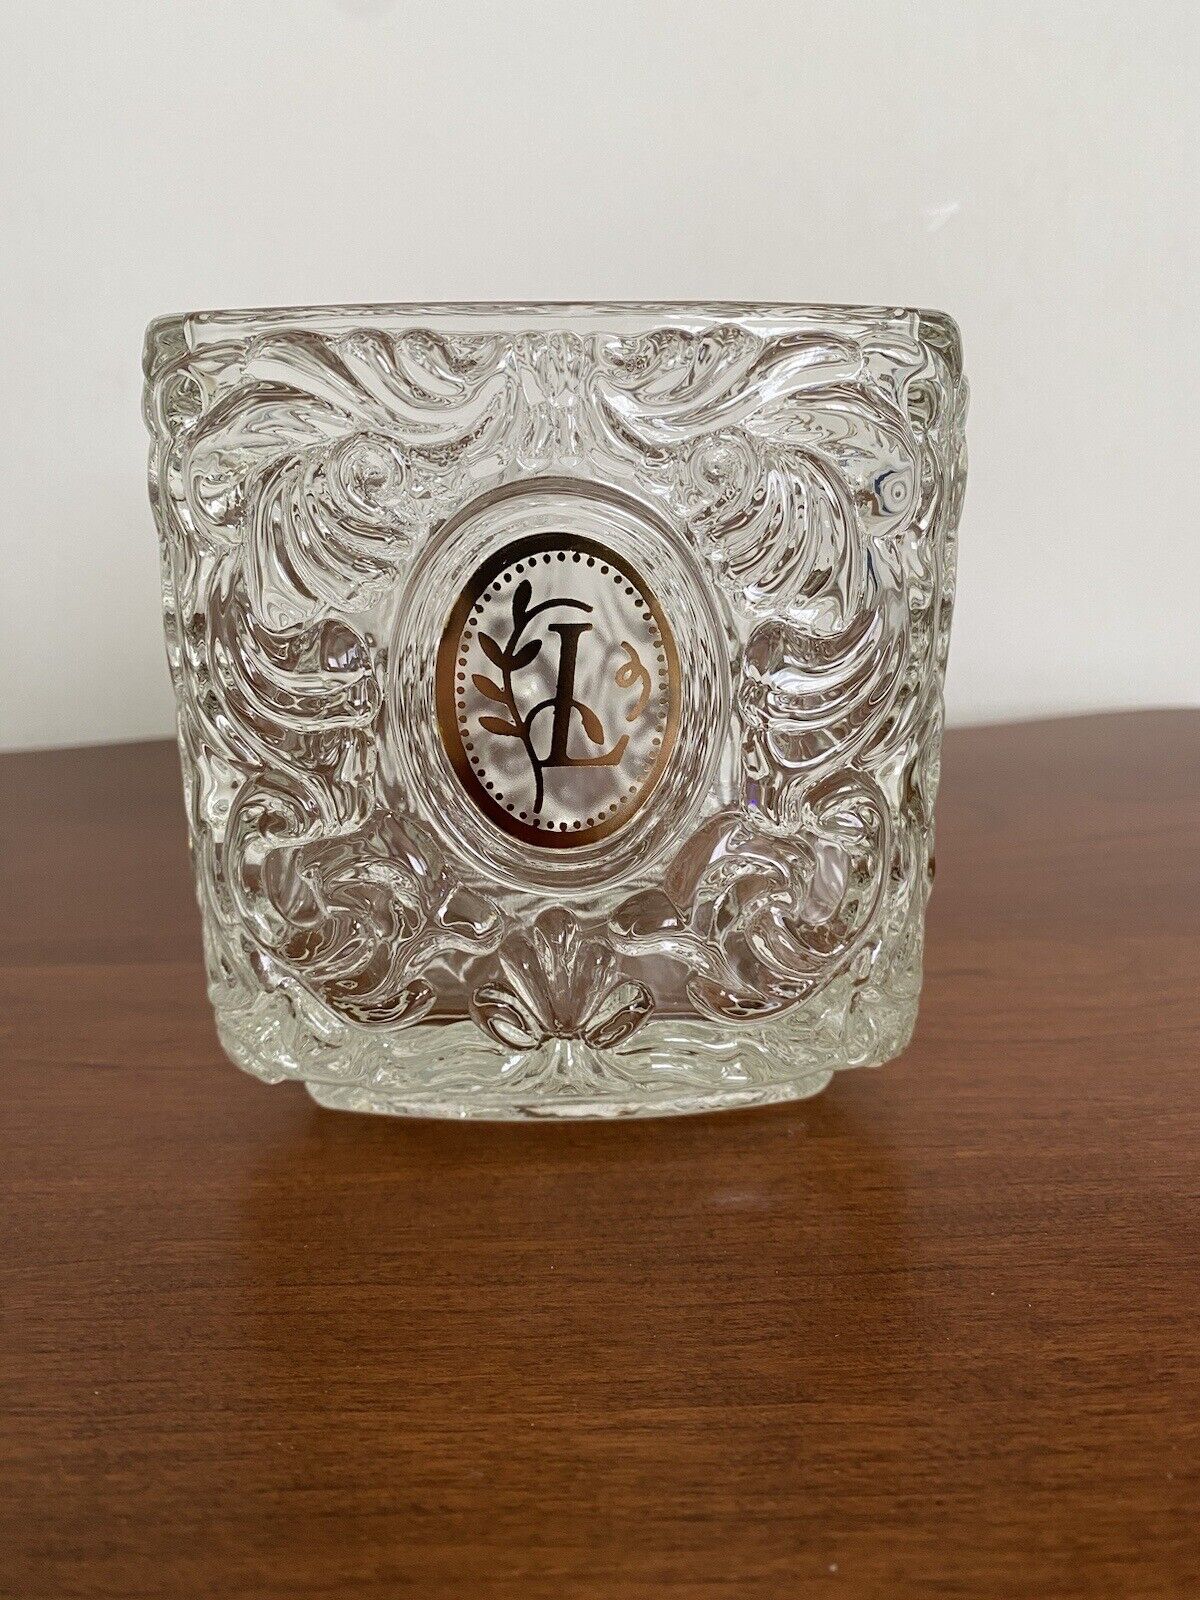 Avon Collectible Vintage Heavy Patterned Glass Candle Holder Monogram “L”